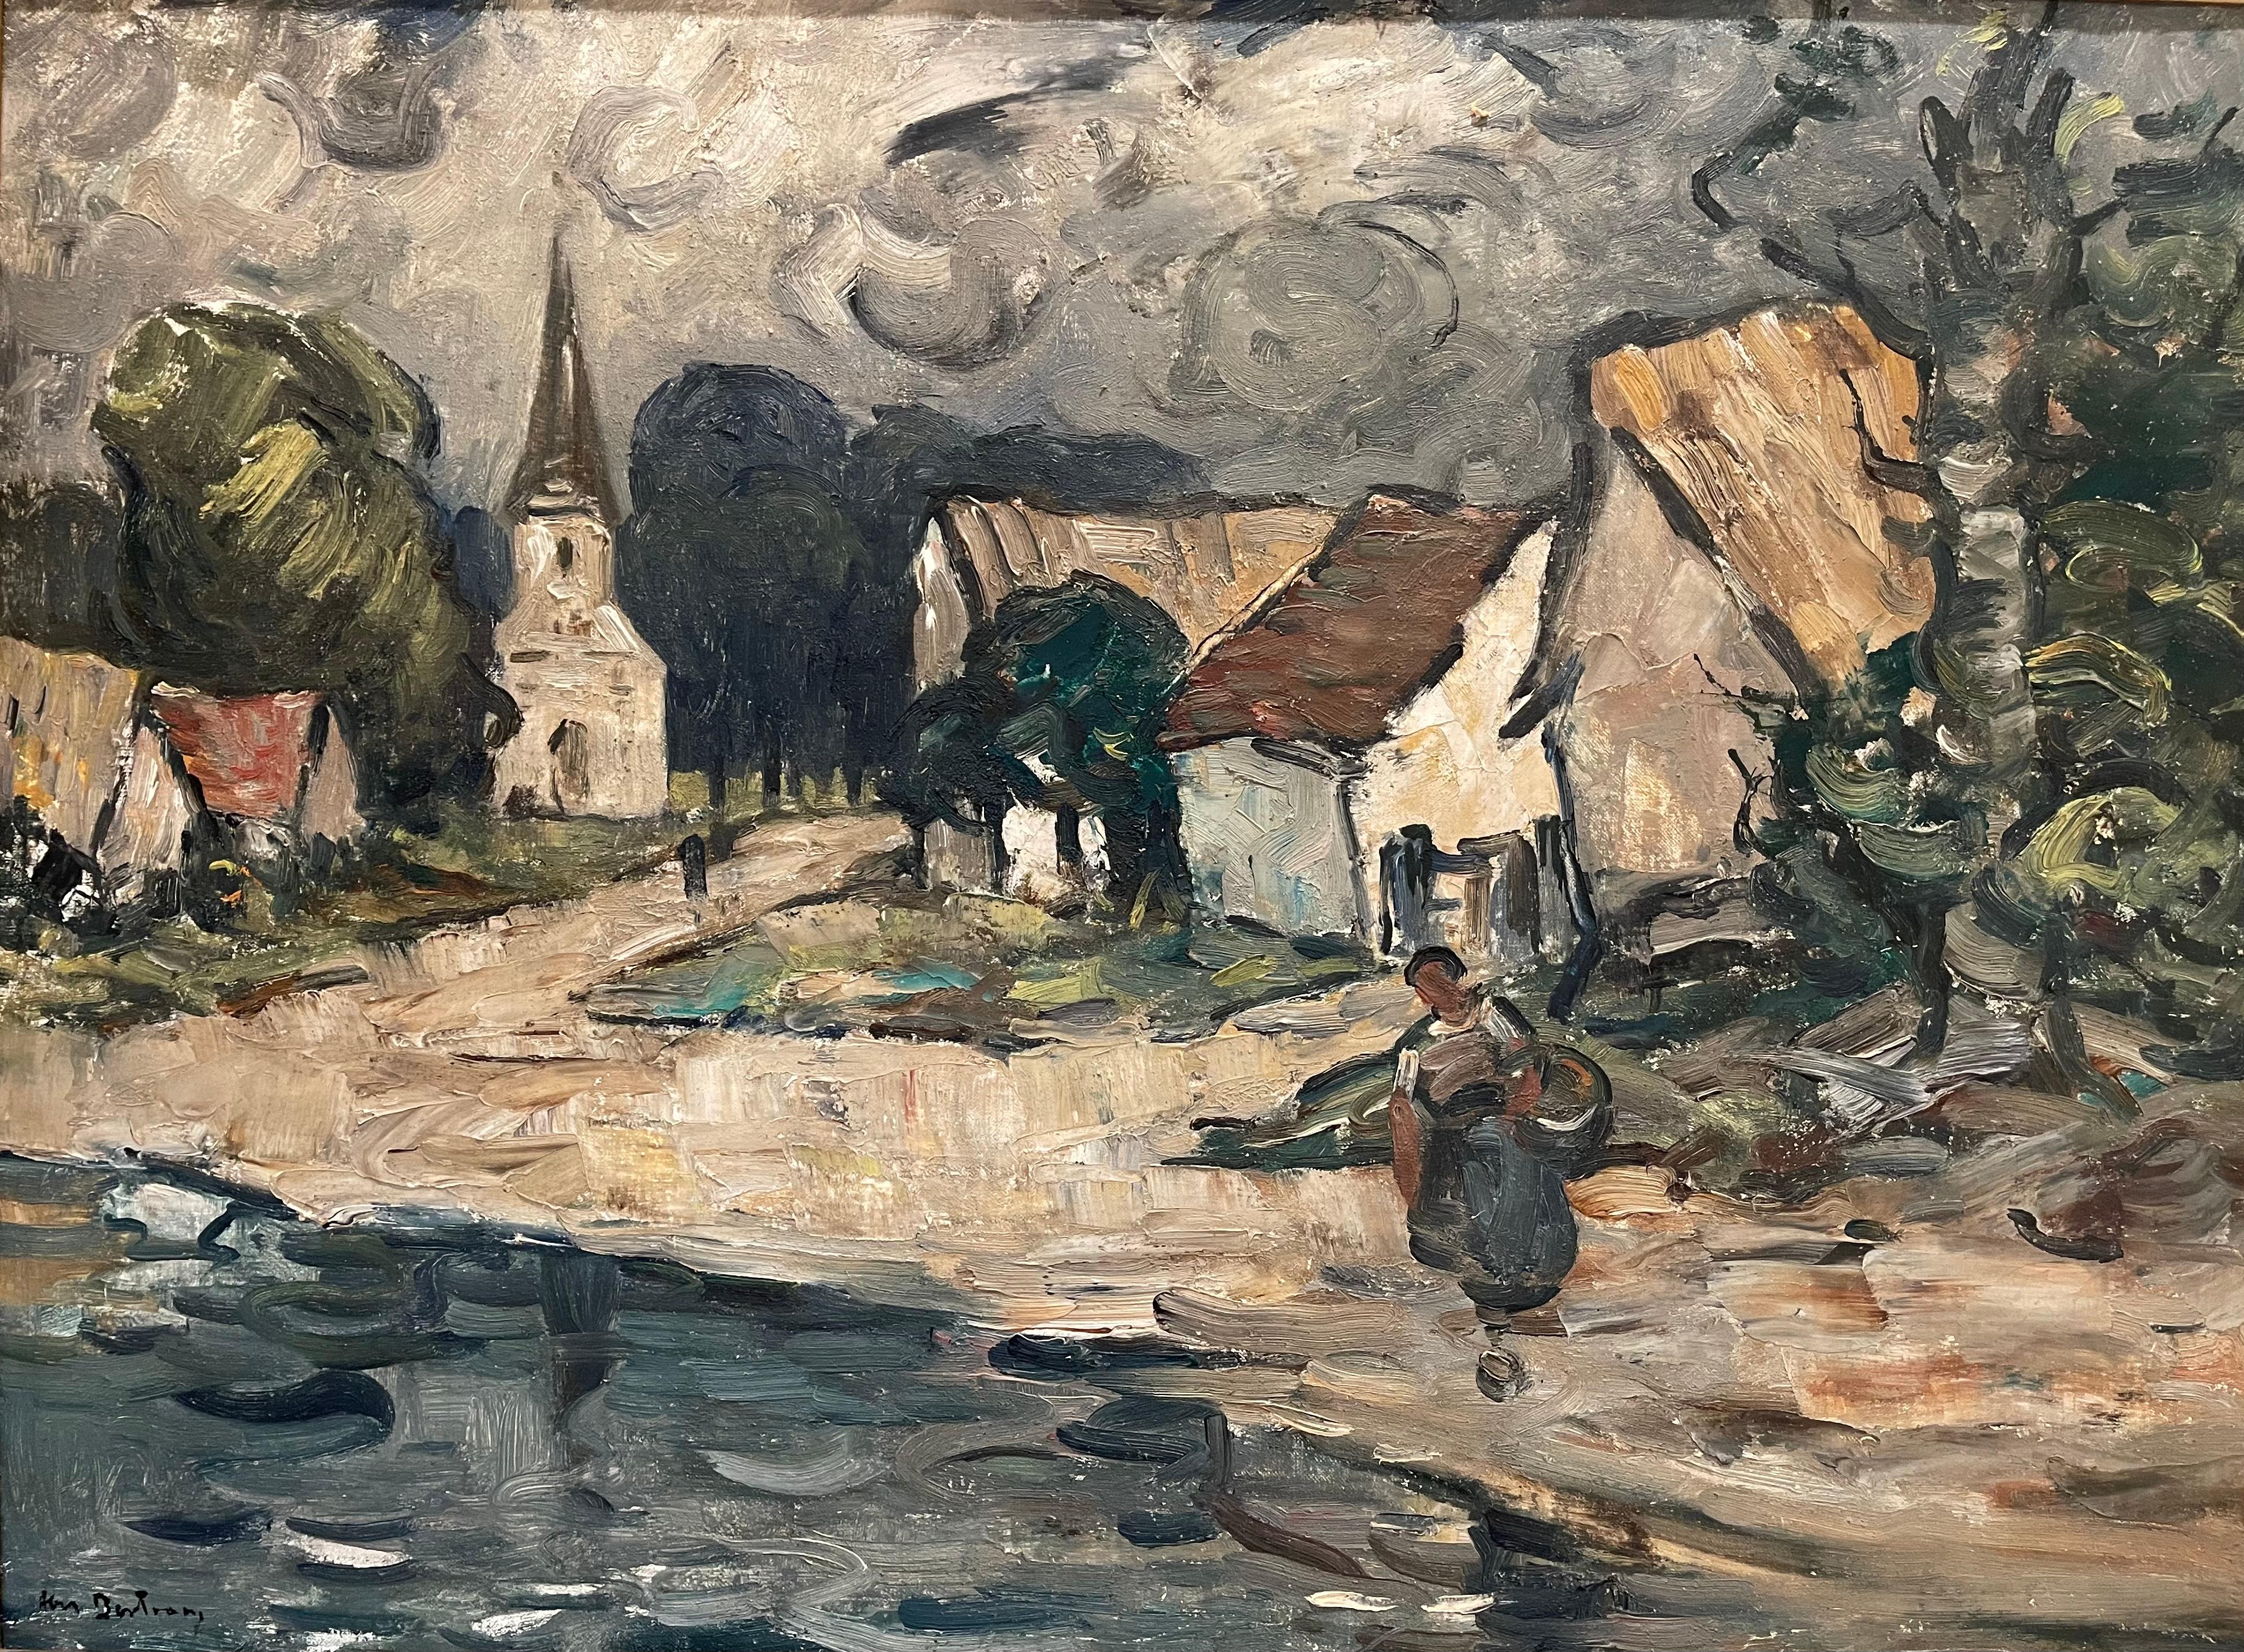 Oil on canvas painting signed Abel Bertram lower left. It represents a village scene and is in very good condition.
Dimensions
with frame - H 69cm x W 89cm
Without frame - H 54cm x 73cm